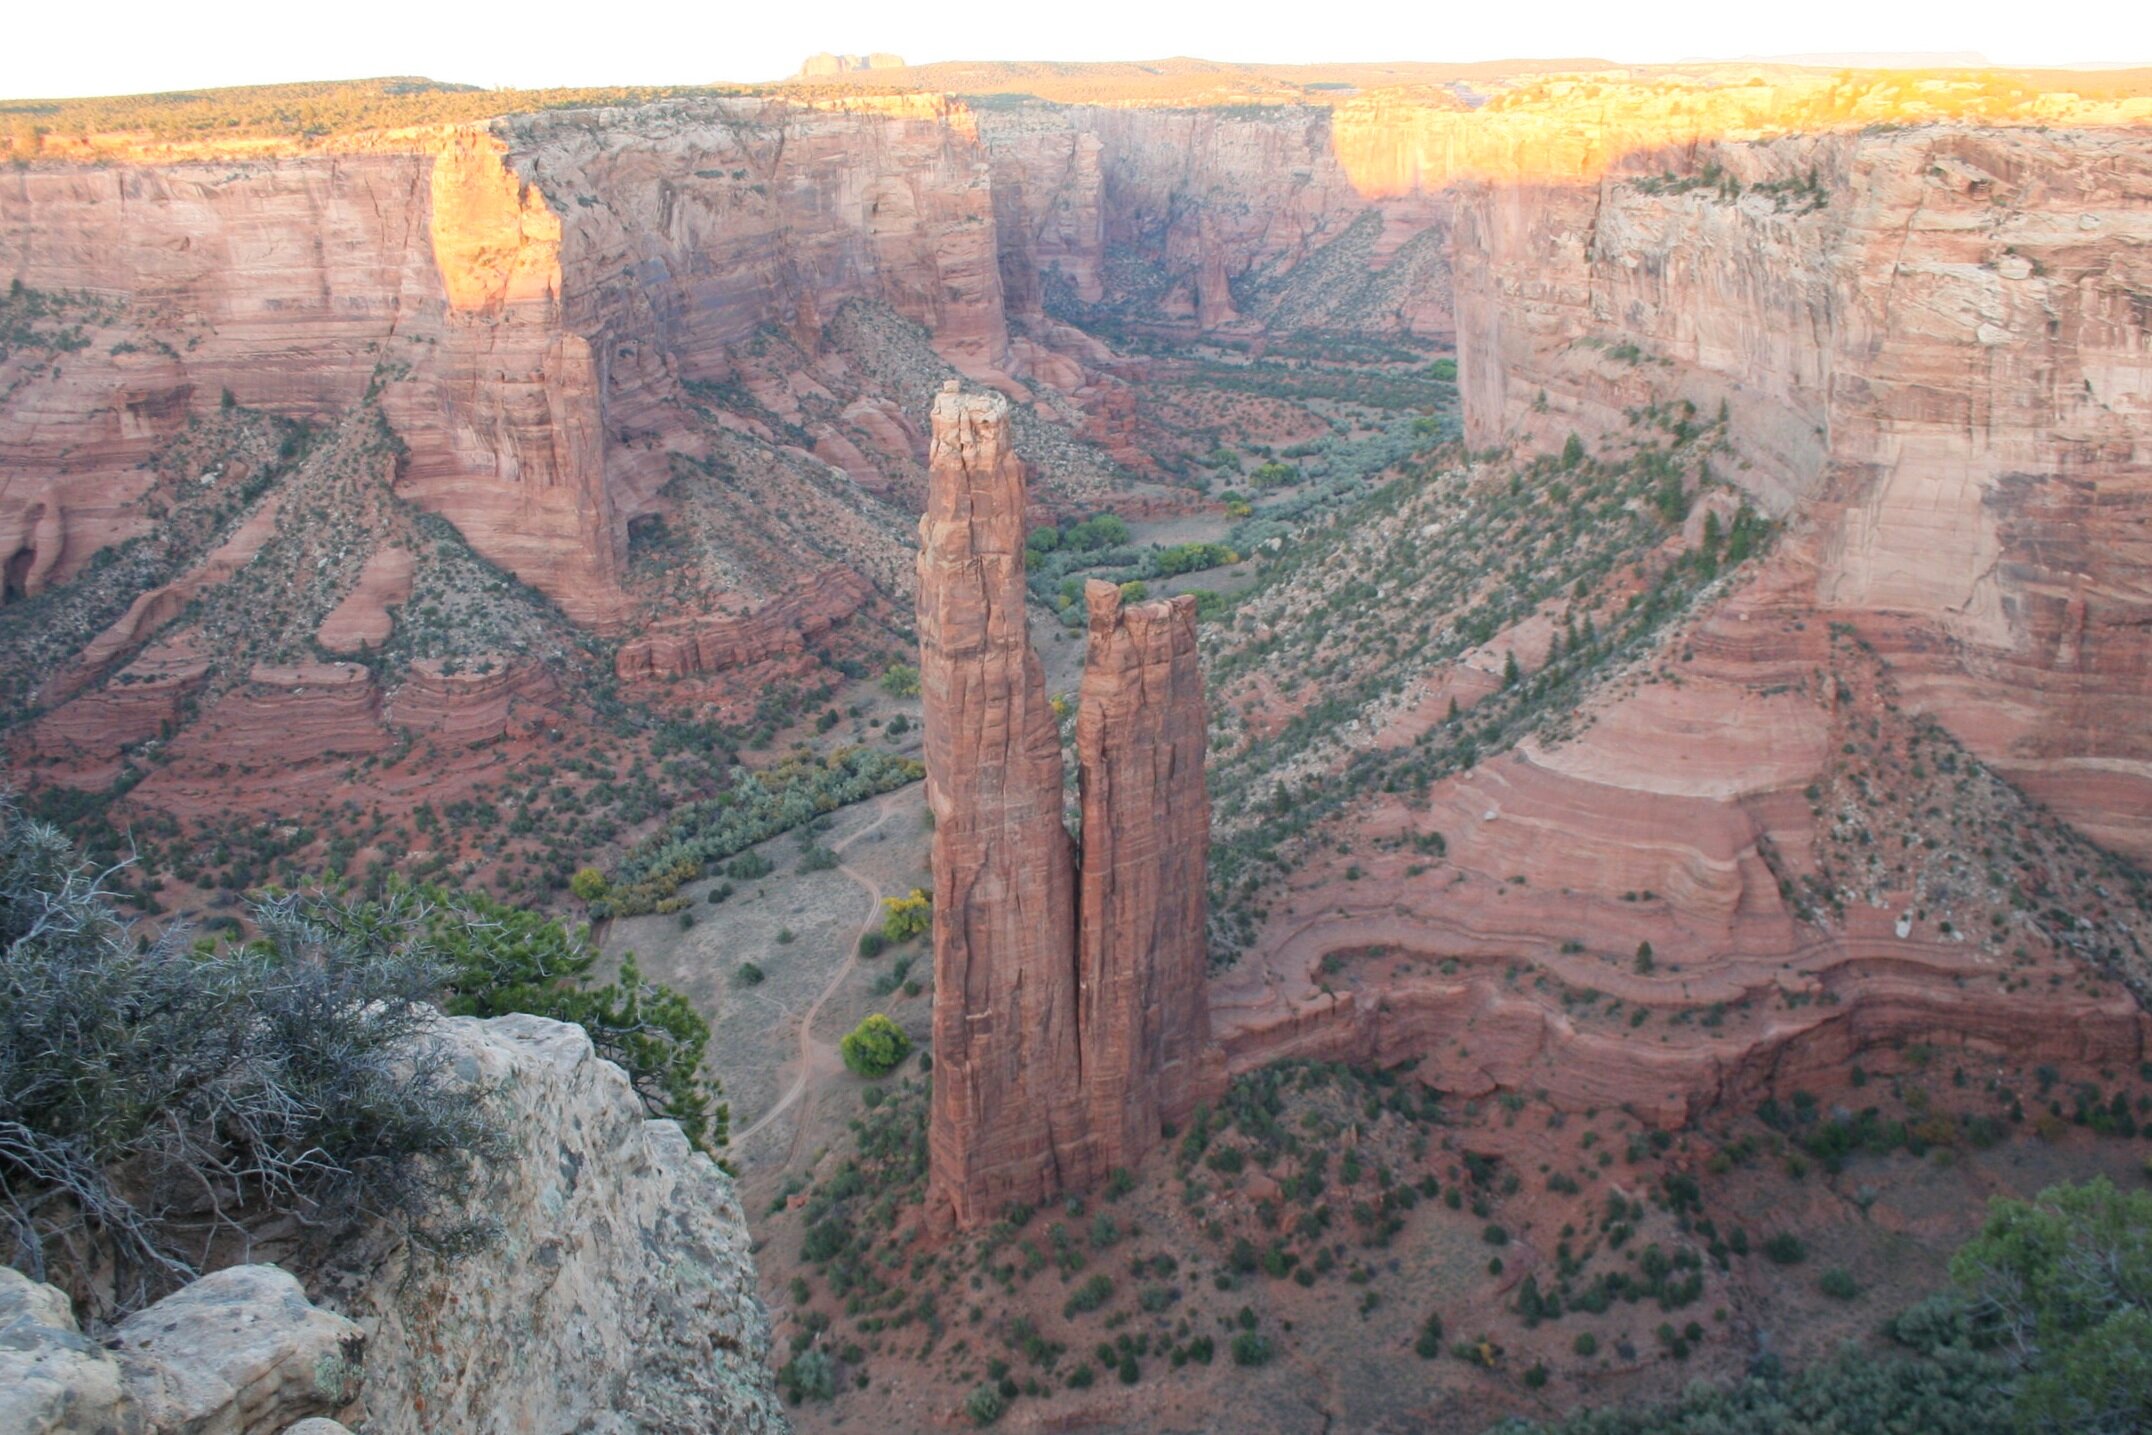   The view of Spider Rock from the overlook.  